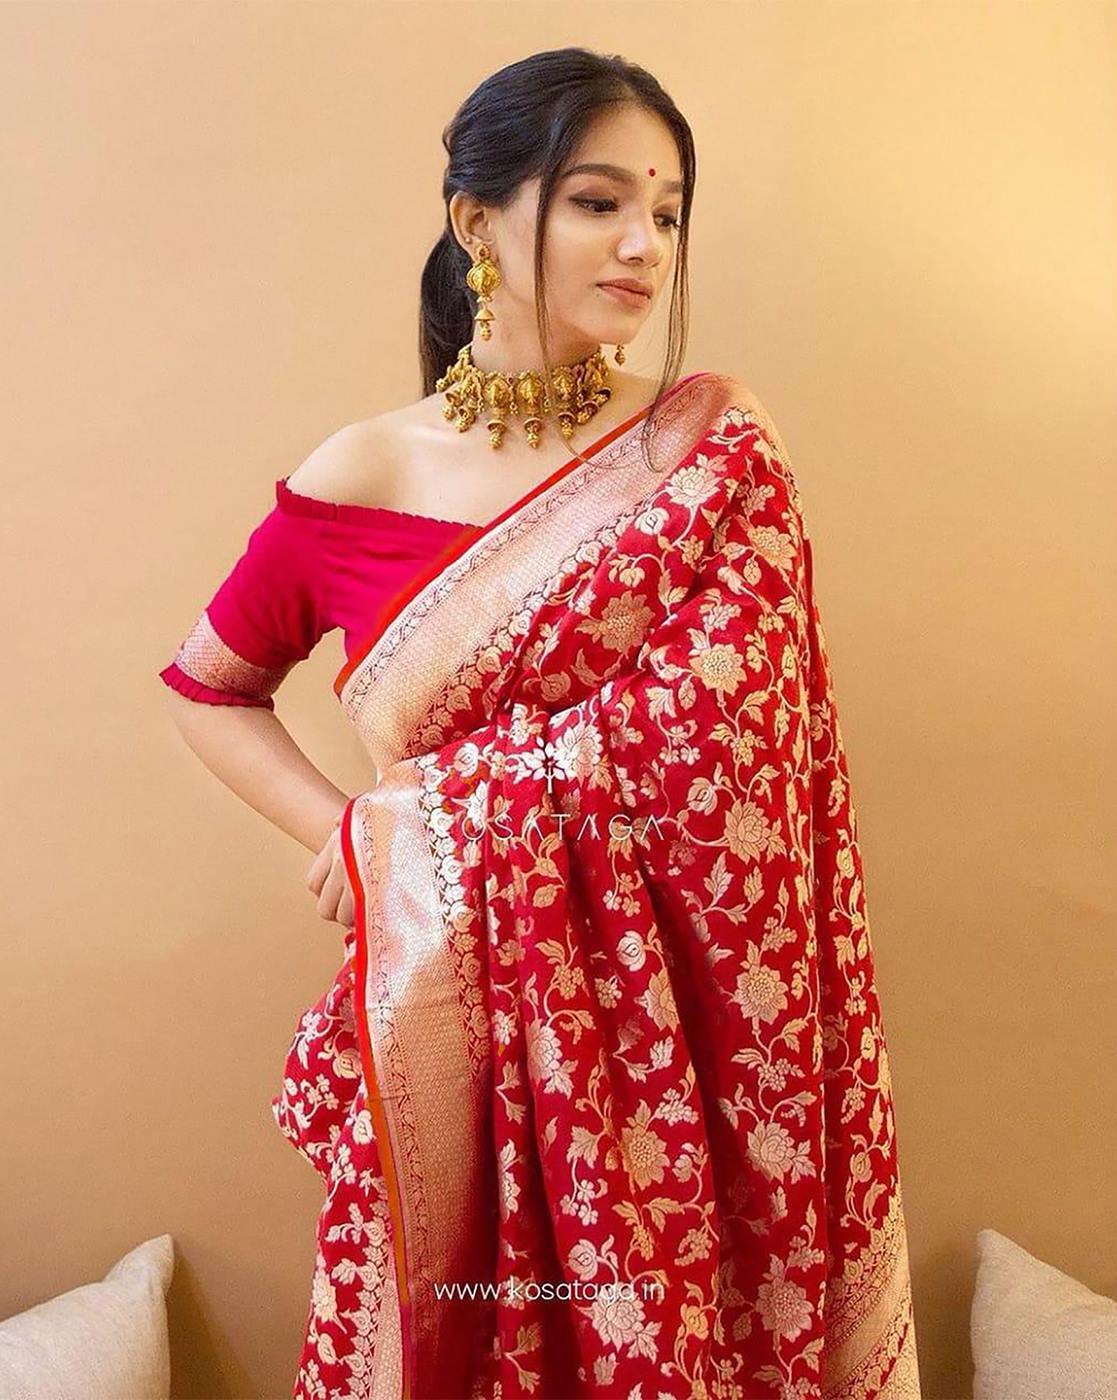 Dohr | Red organza floral printed saree with blouse | Amina – Dohr India